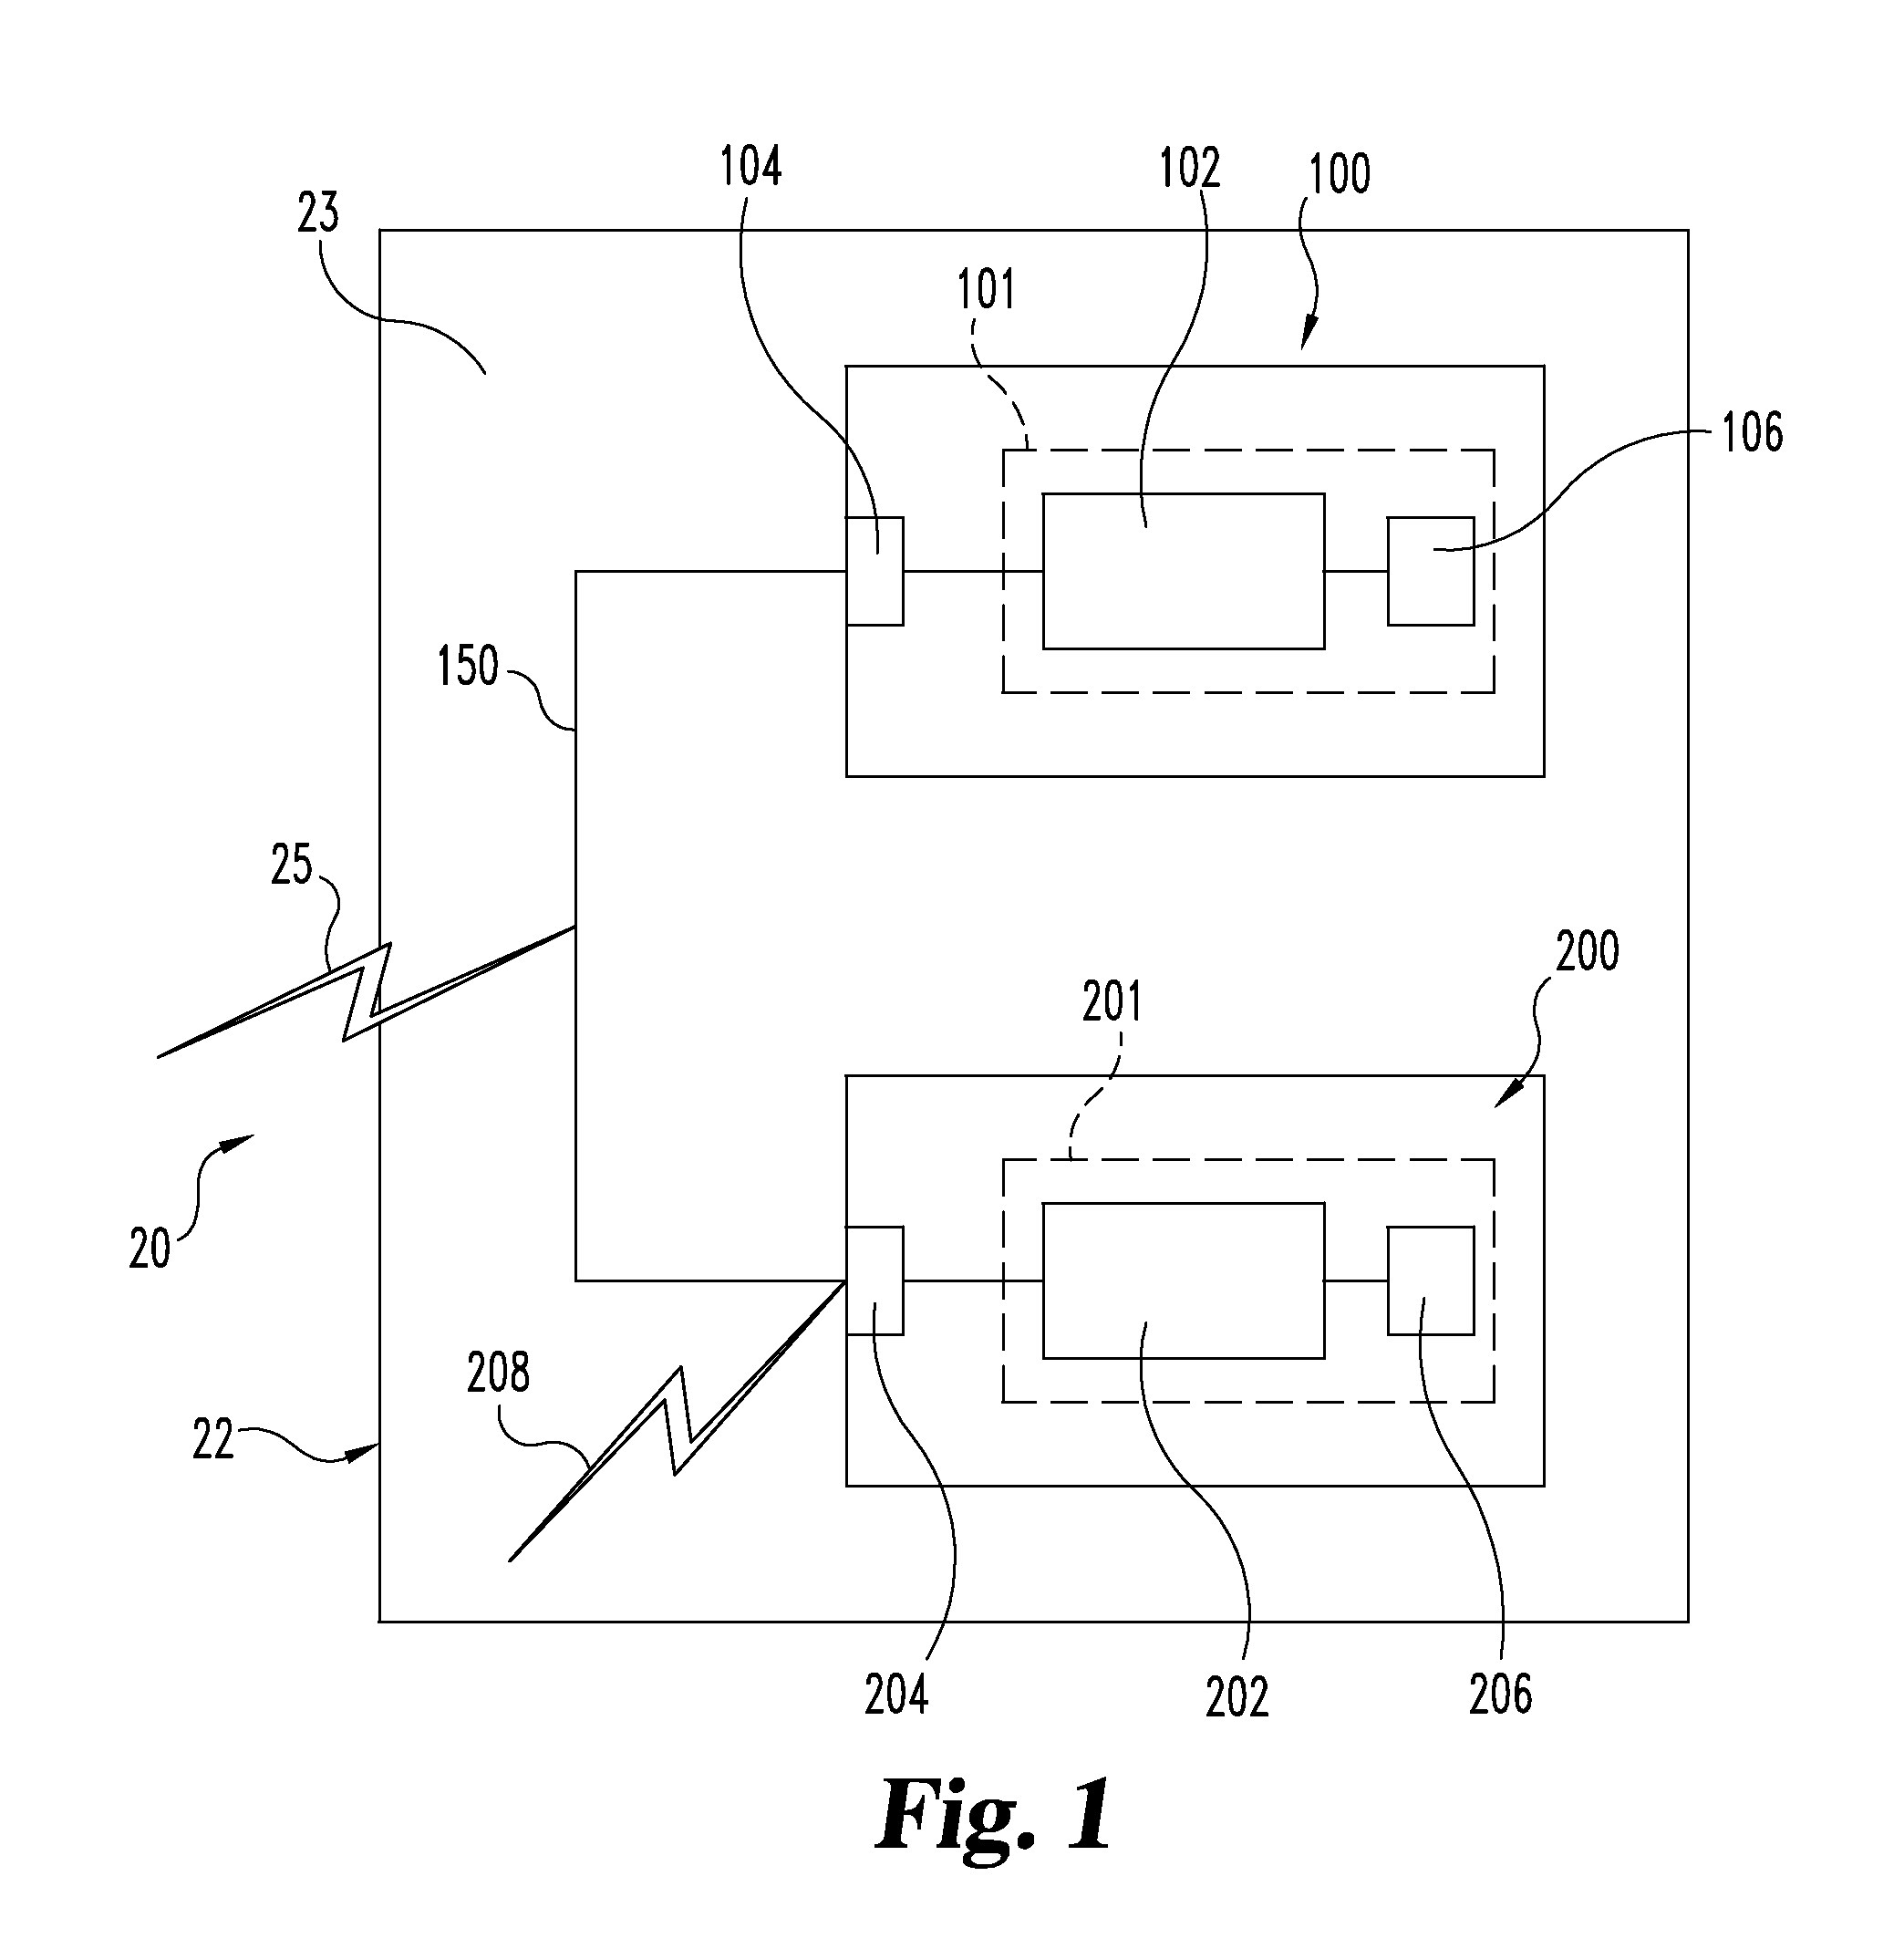 Systems and methods for administering a medical regimen